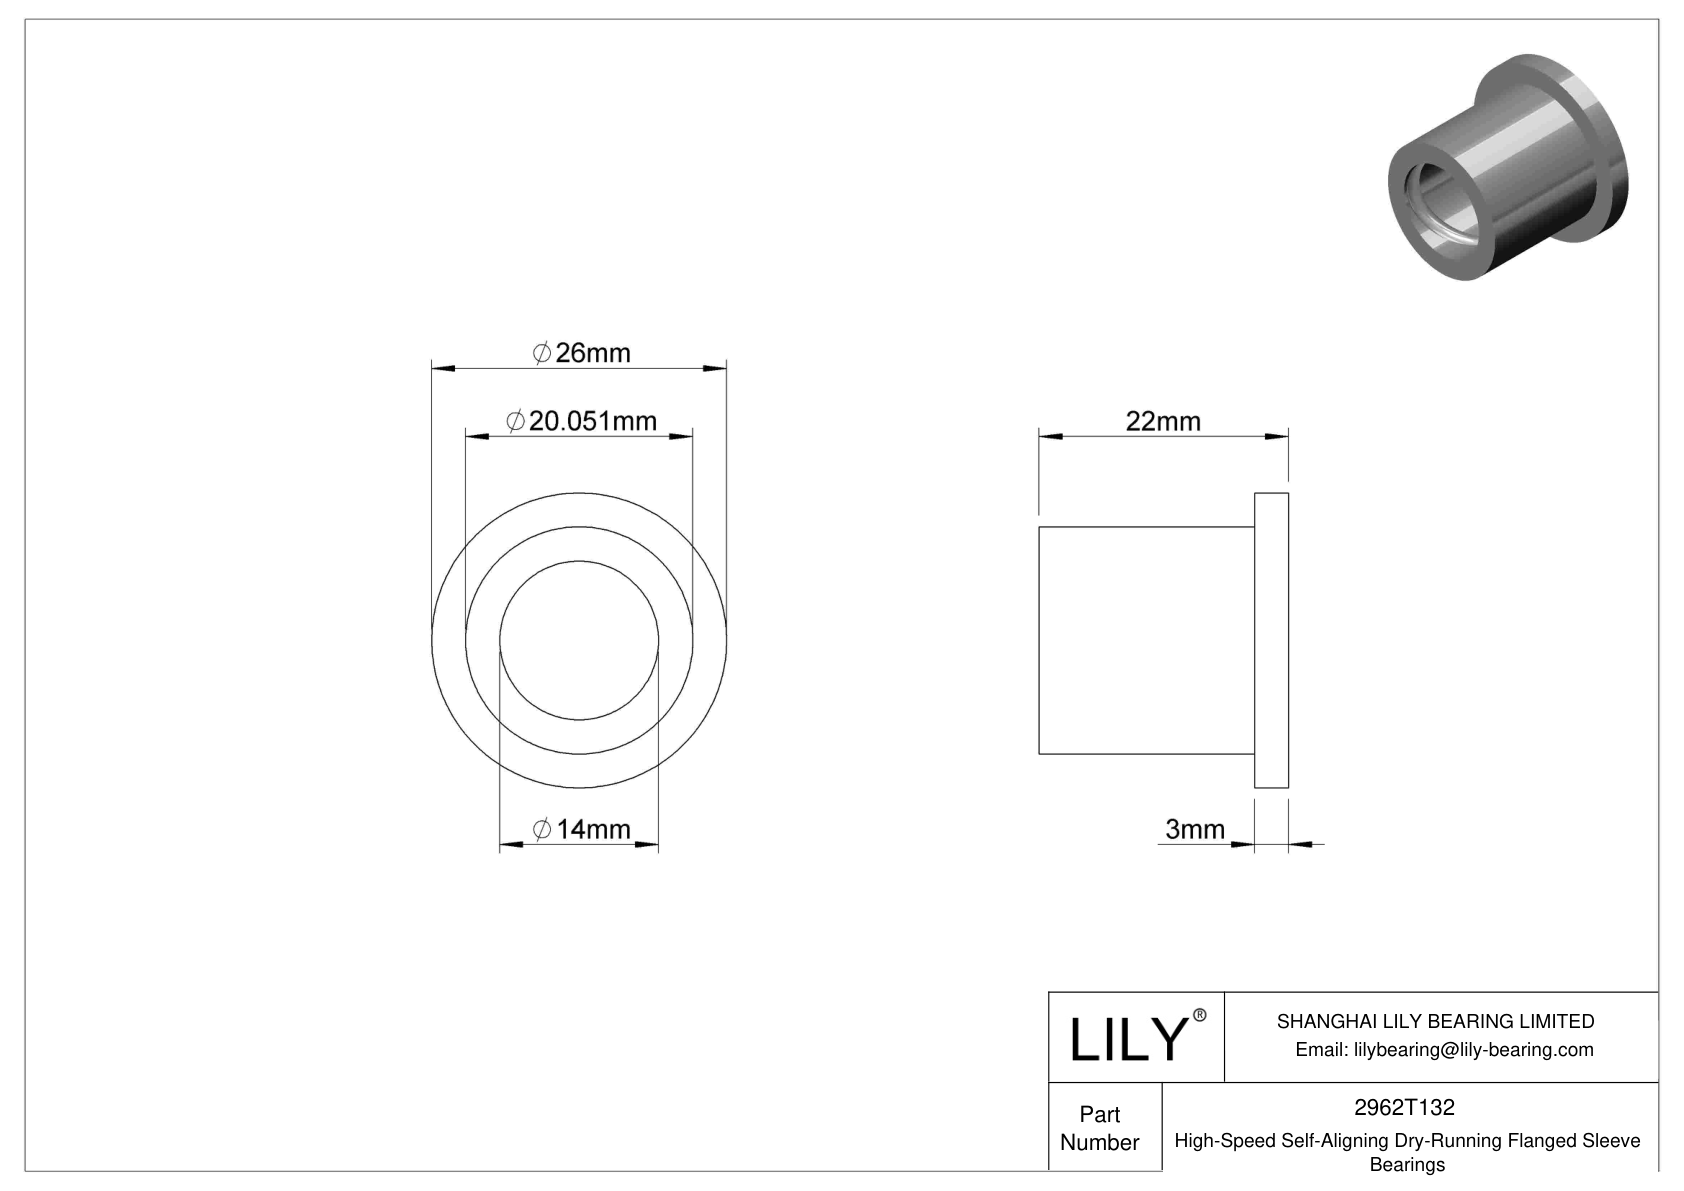 CJGCTBDC High-Temperature Dry-Running Flanged Sleeve Bearings cad drawing